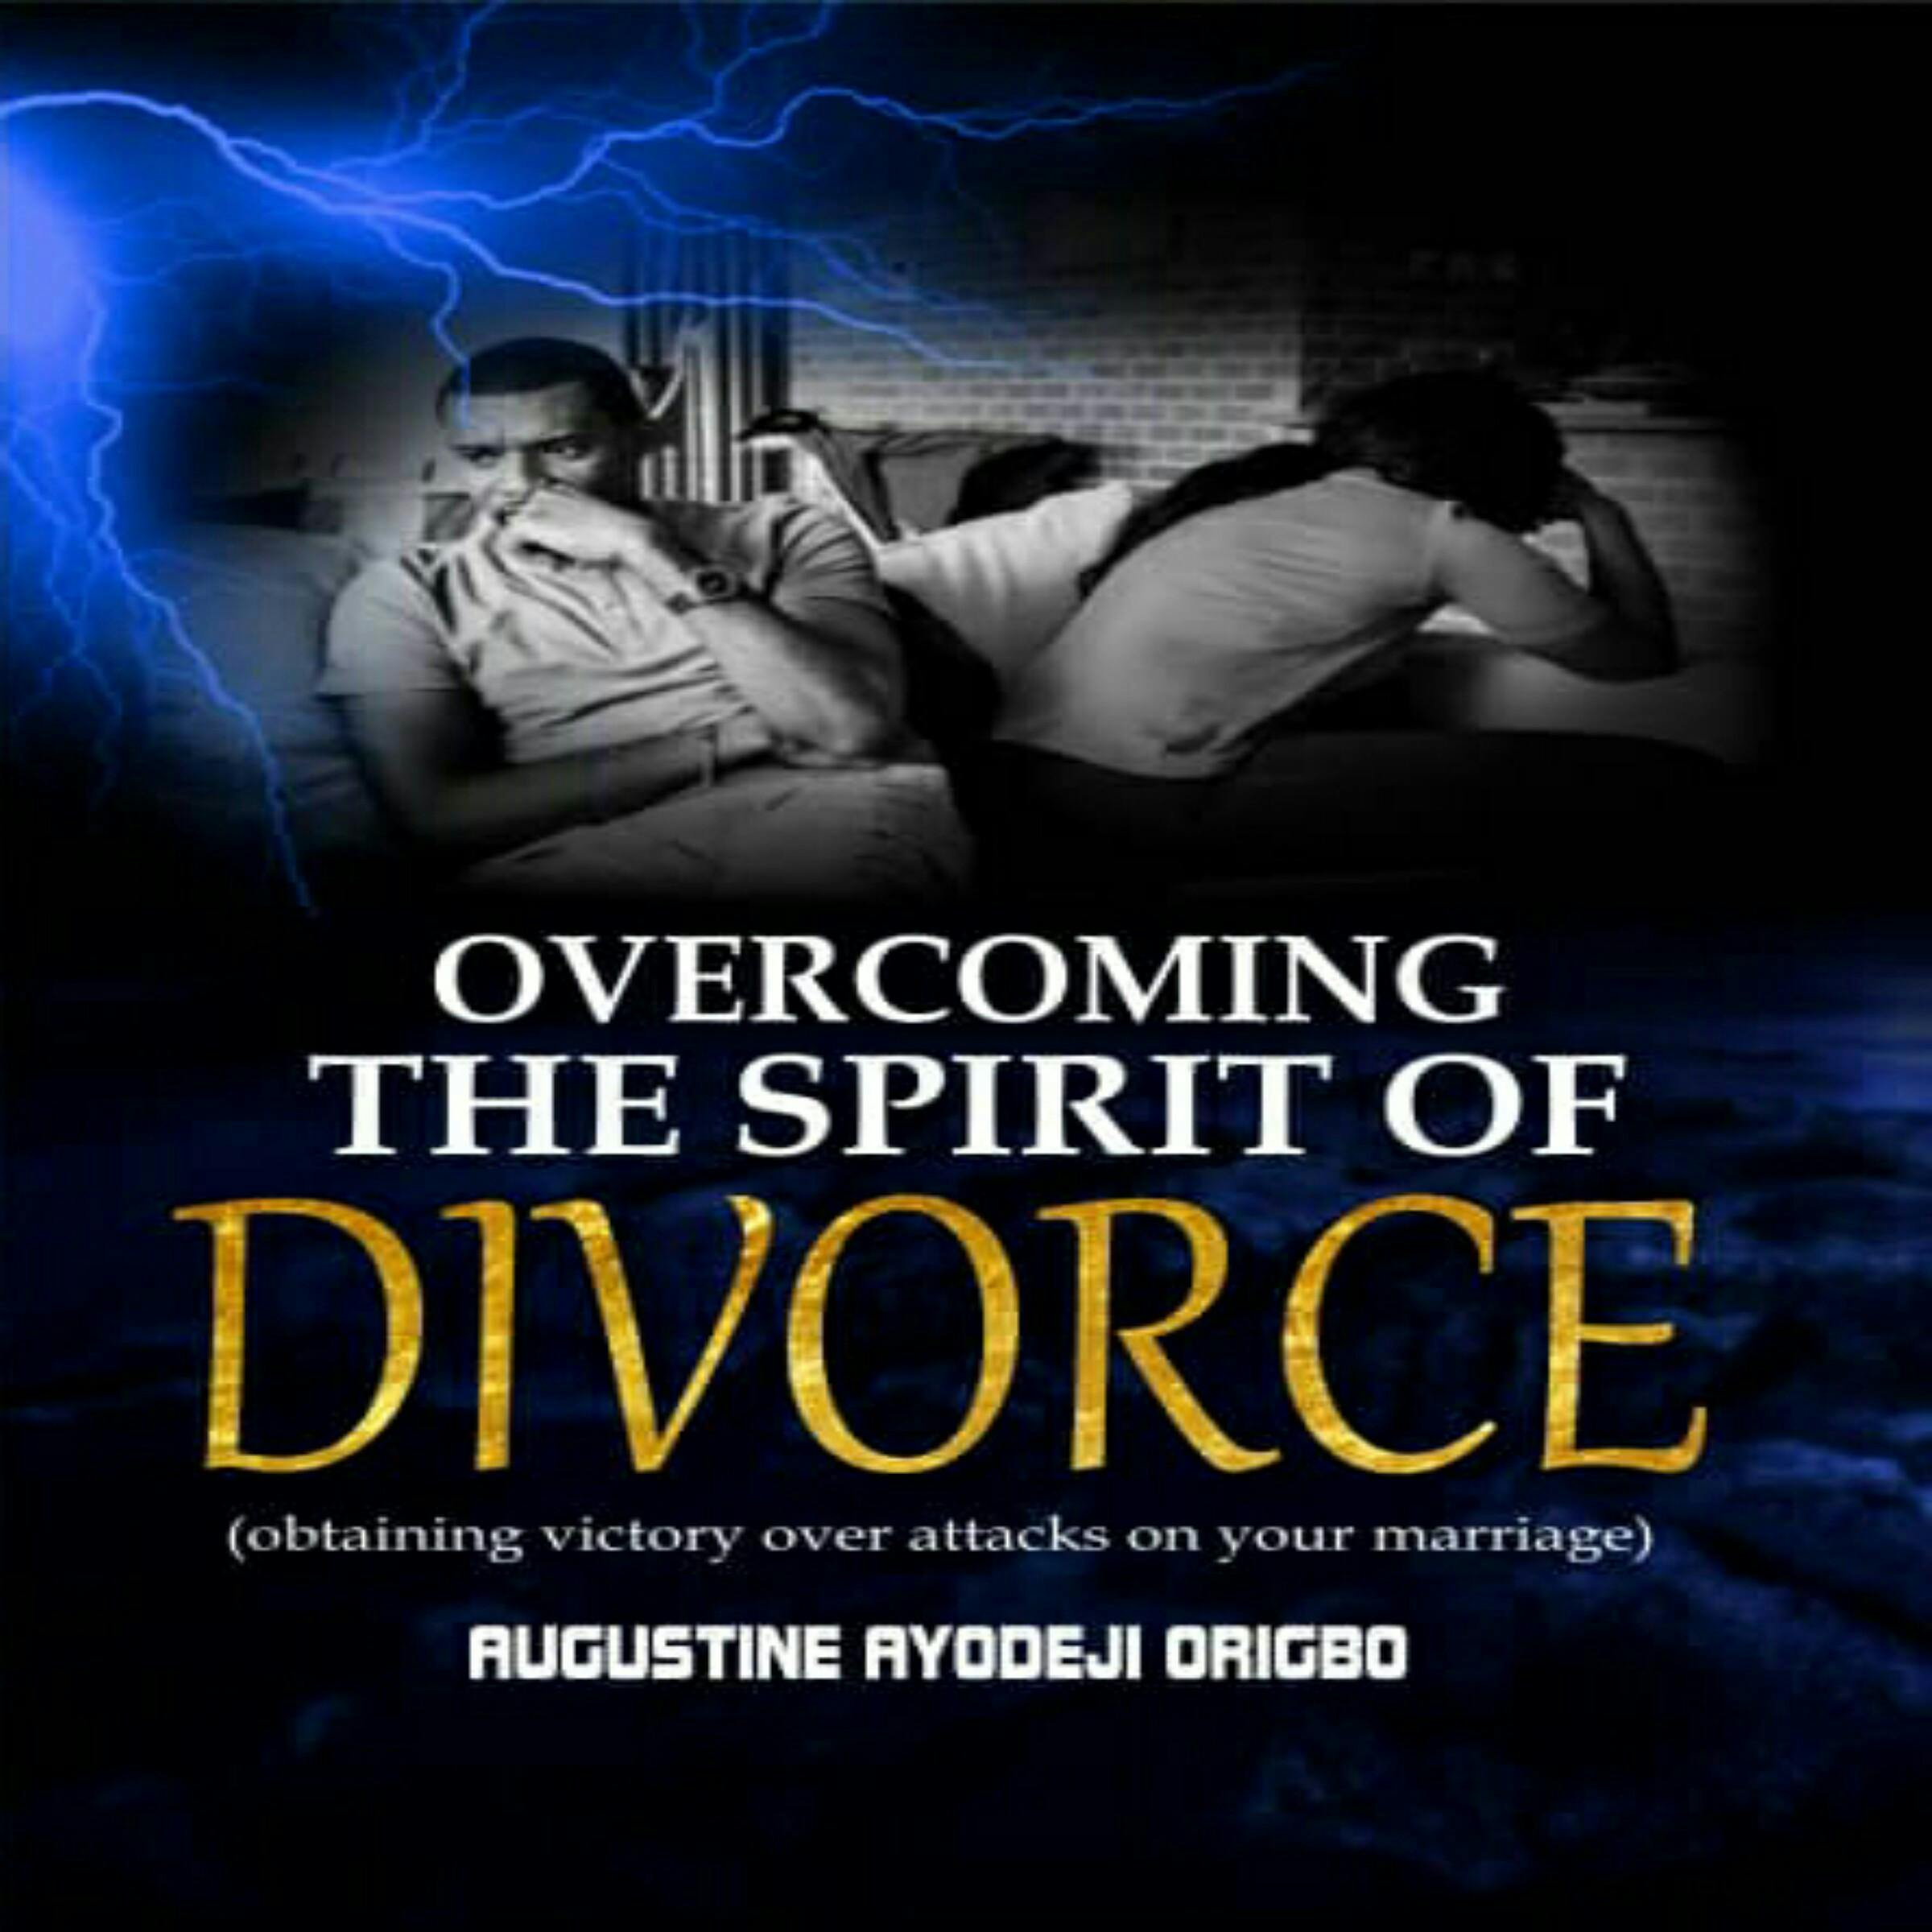 Overcoming the Spirit of Divorce: Obtaining victory over attacks on your marriage - undefined